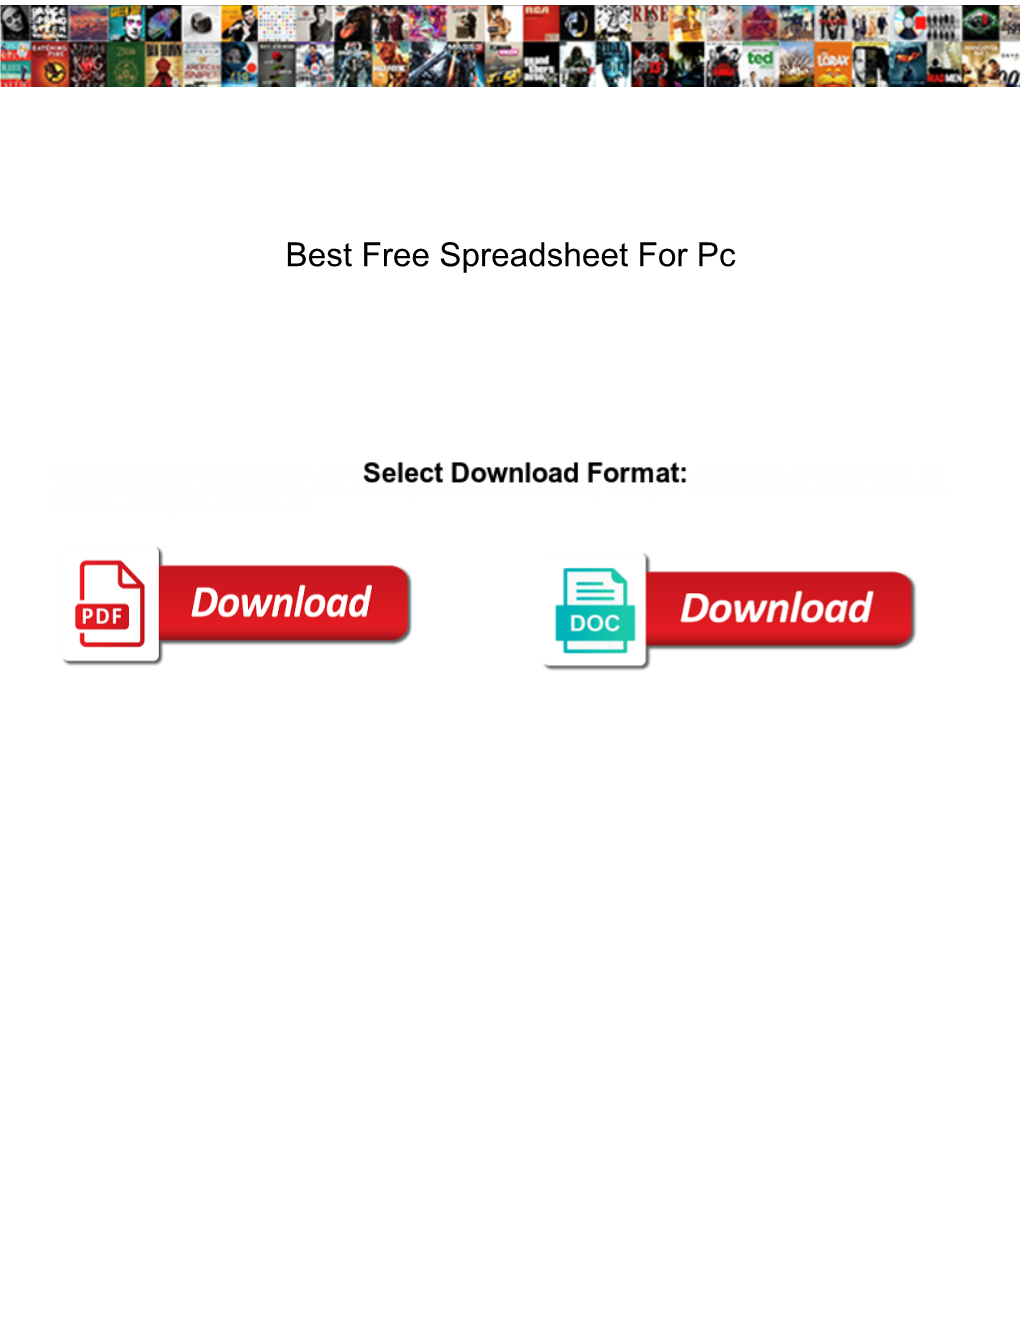 Best Free Spreadsheet for Pc